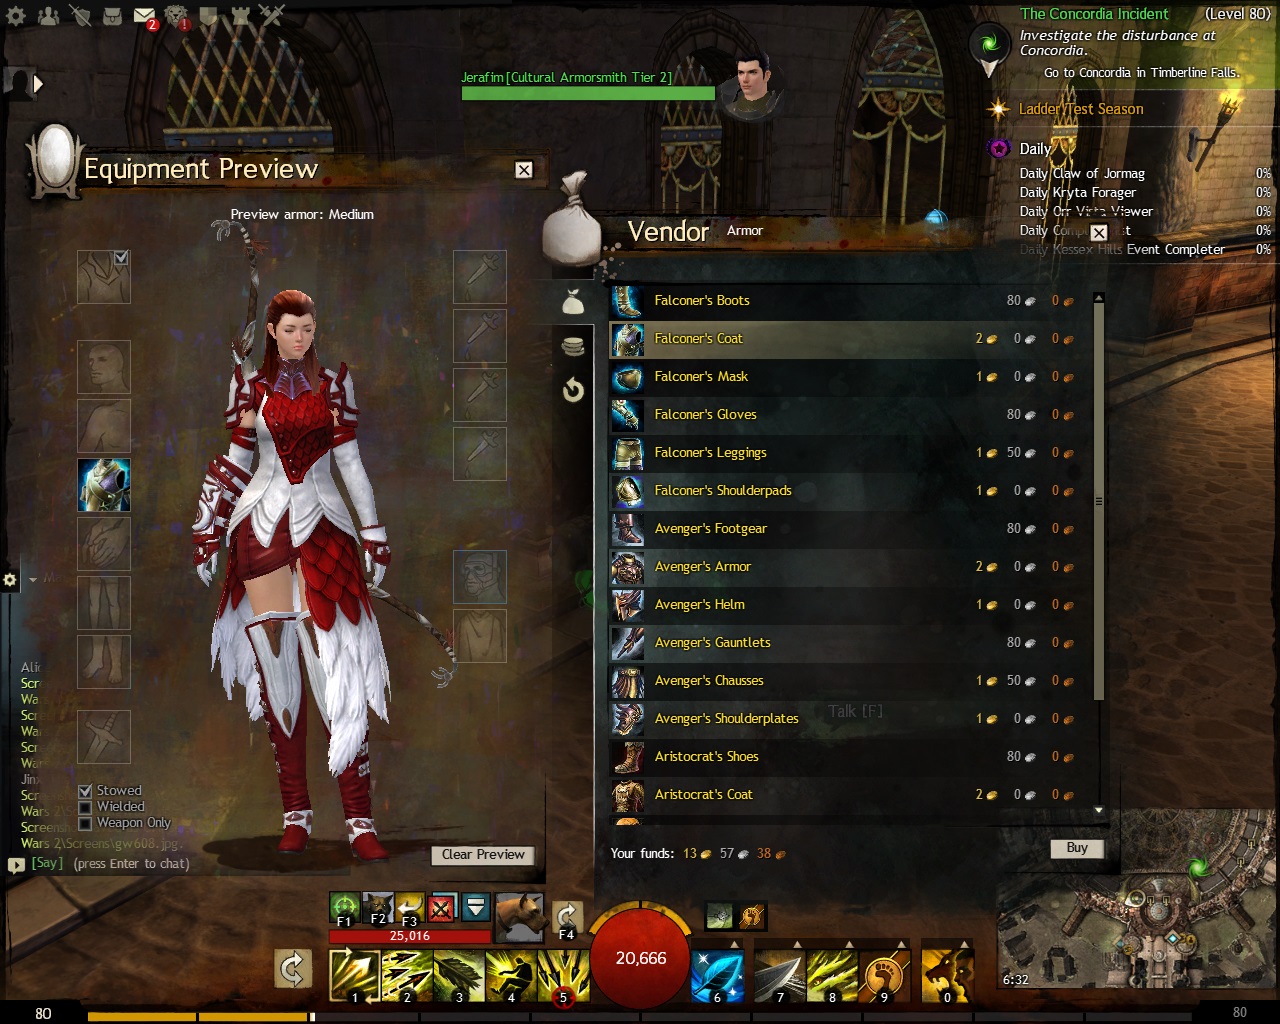 Guild wars 2 - Falconer's Coat with Skirt - 01